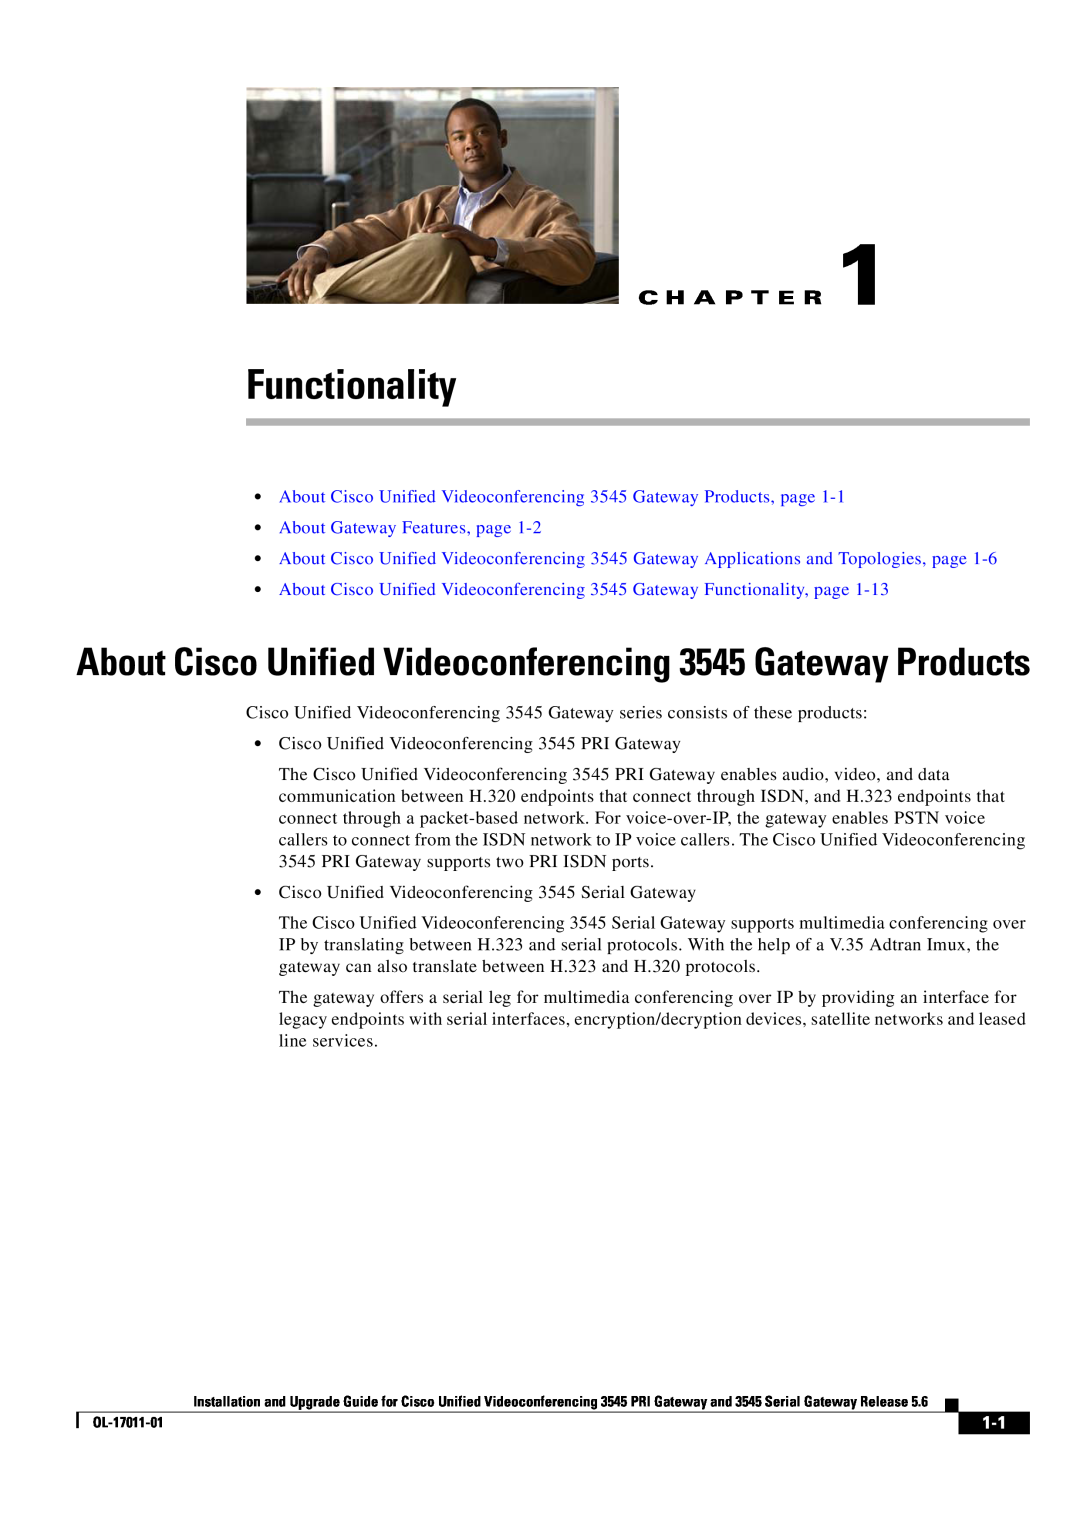 Cisco Systems 3545 Serial Functionality, C H A P T E R, About Cisco Unified Videoconferencing 3545 Gateway Products, page 